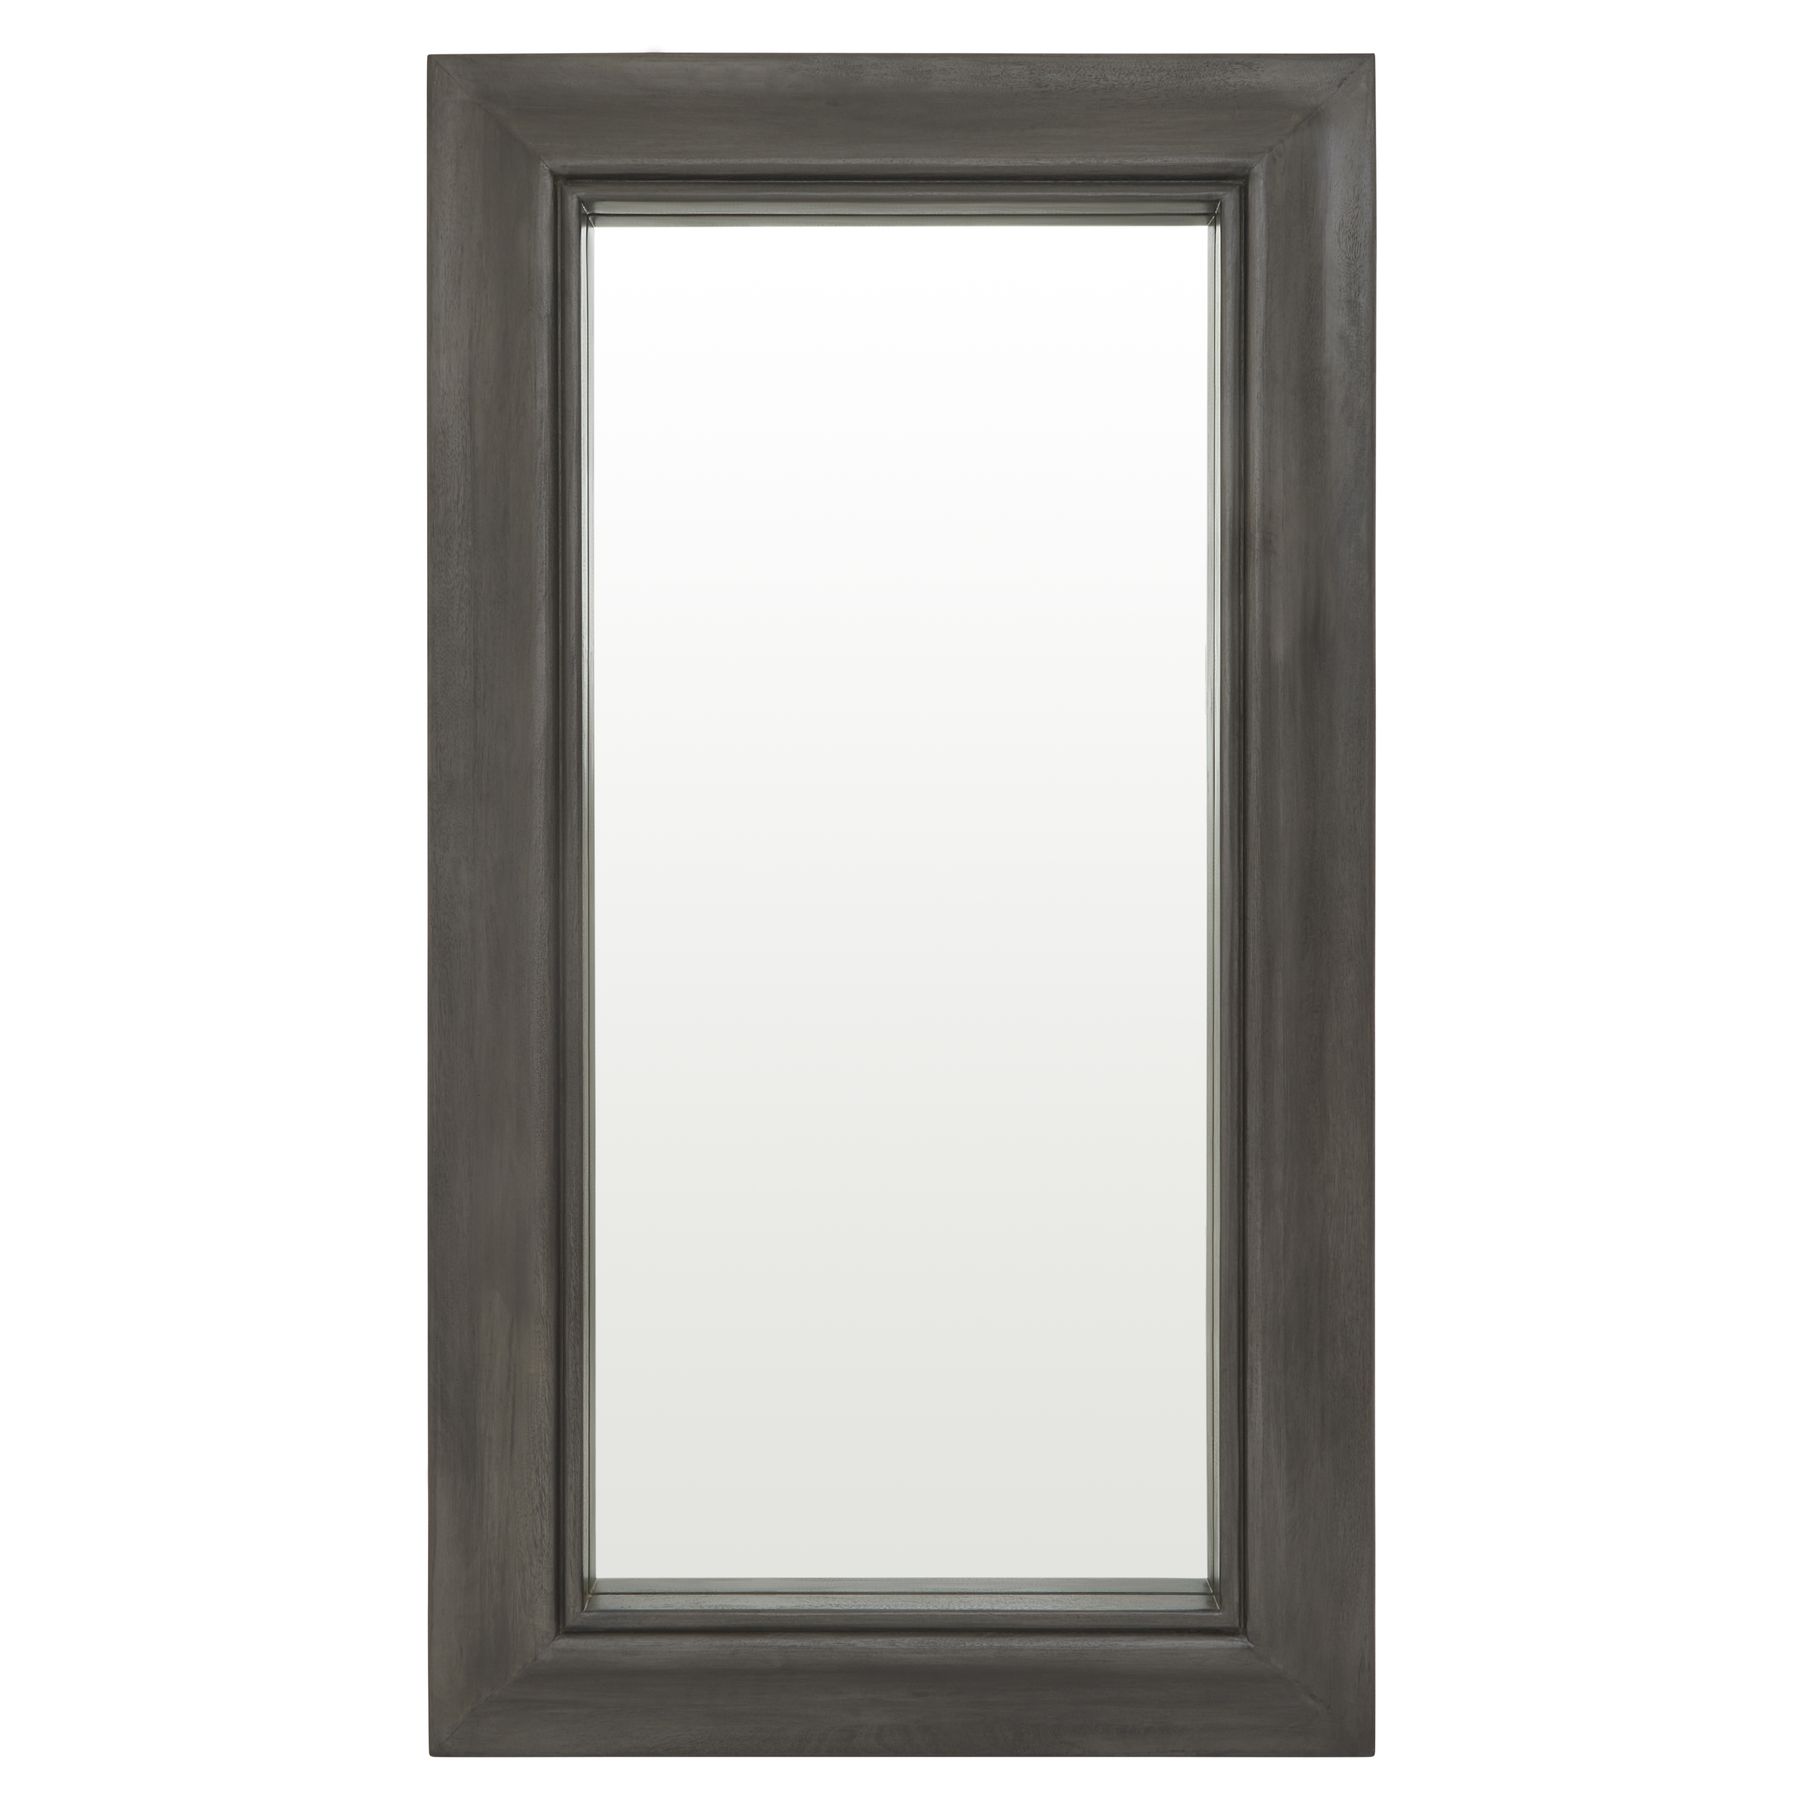 Lucia Collection Large Mirror - Image 1